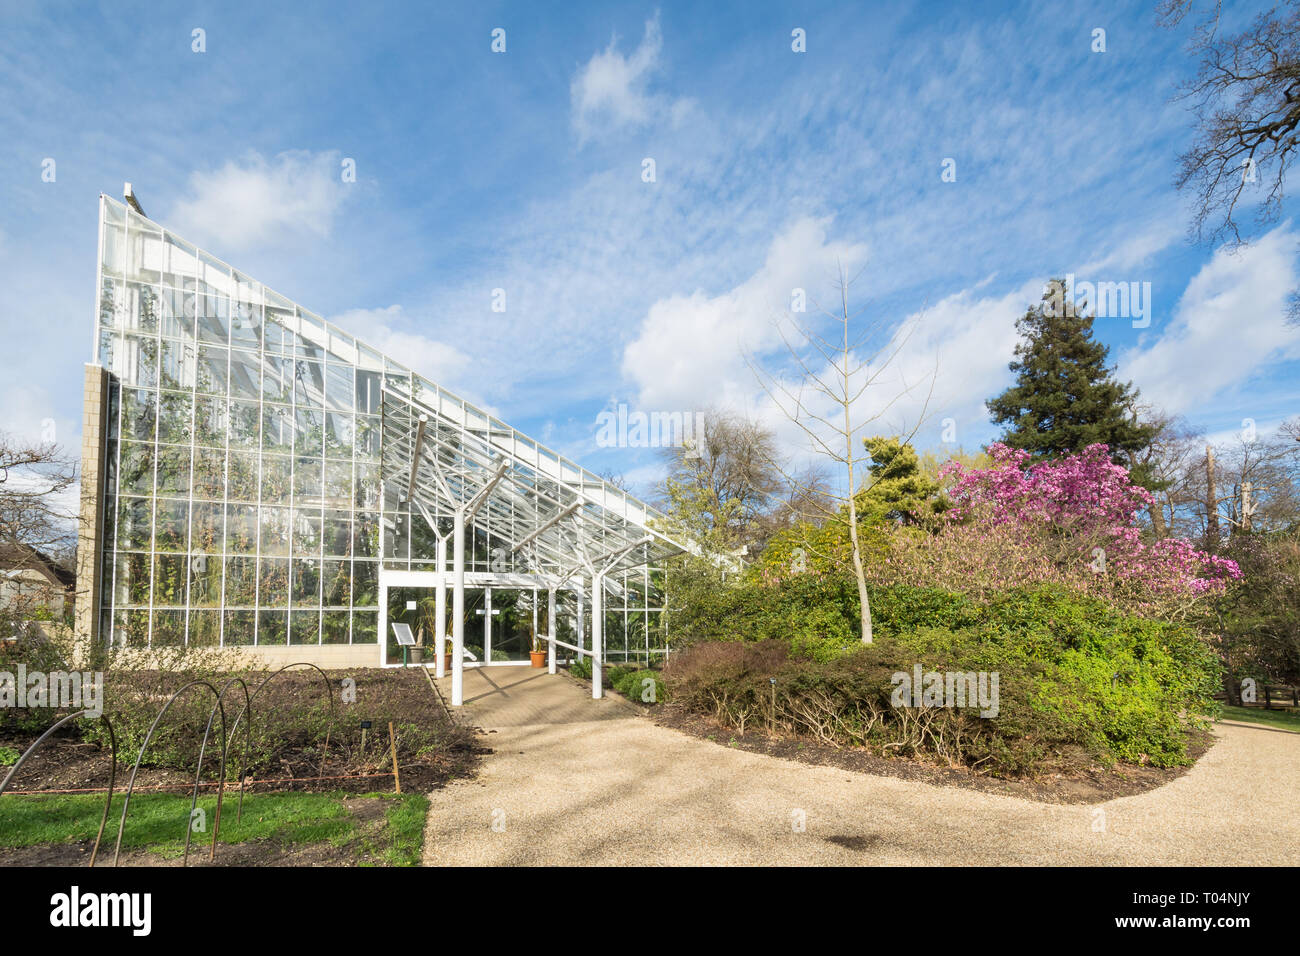 Queen Elizabeth temperate house, a large glasshouse, beside a beautiful magnolia sprengeri 'lanhydrock' tree with pink blooms at Savill Garden, UK Stock Photo